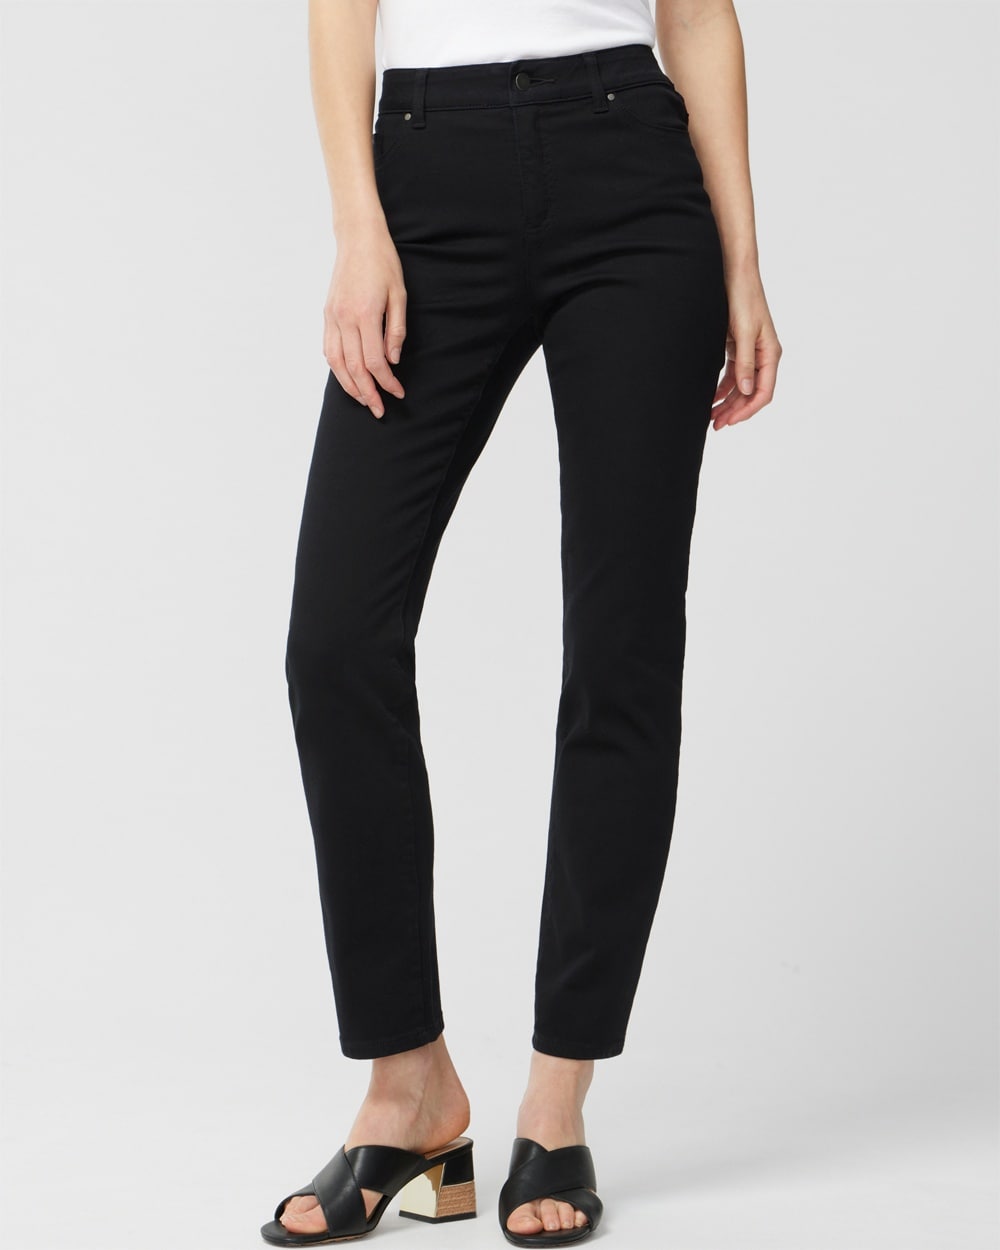 Fabulously Slimming 4-Way-Stretch Jeans